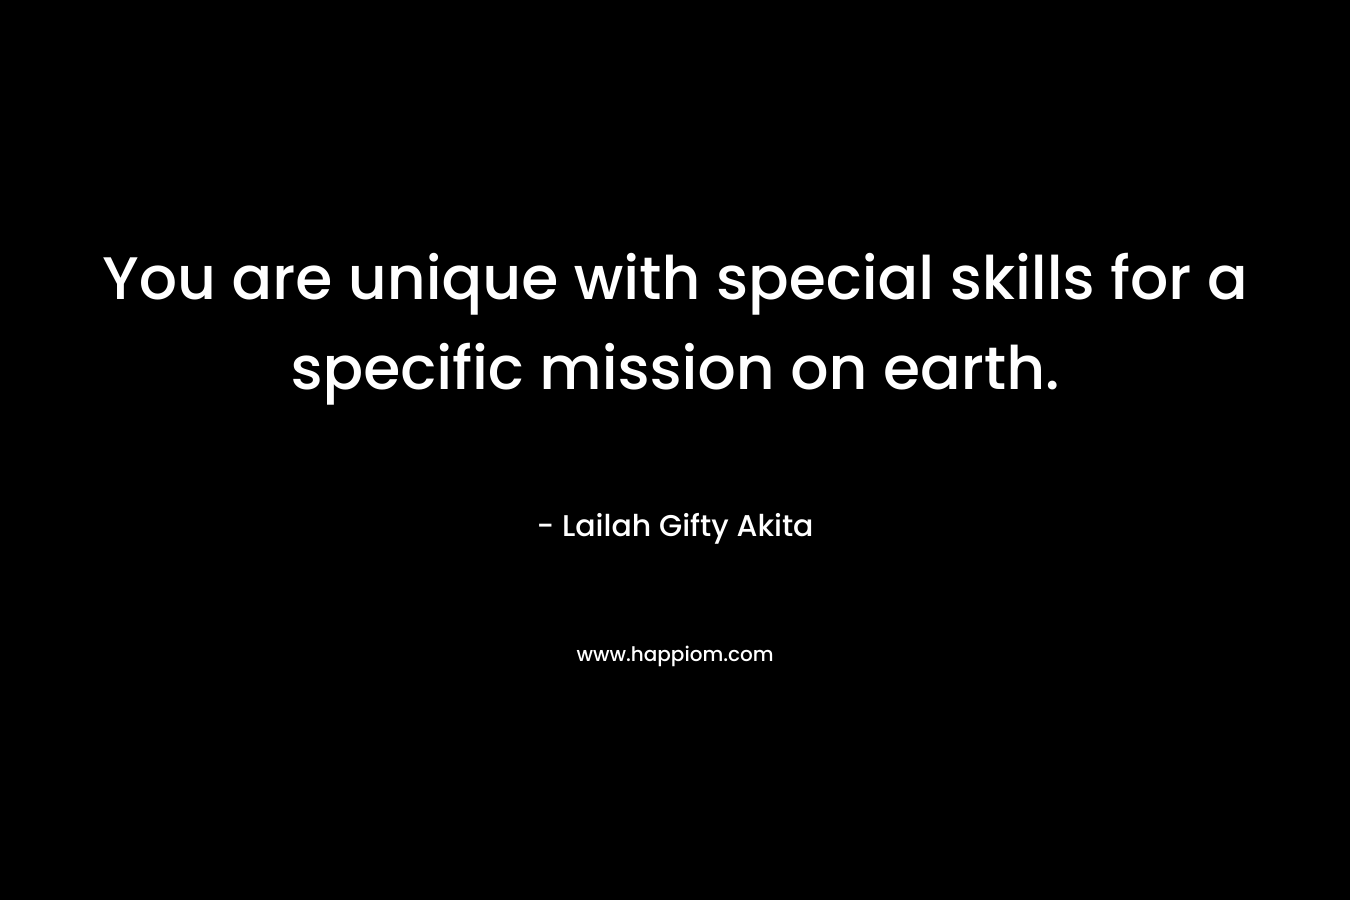 You are unique with special skills for a specific mission on earth. – Lailah Gifty Akita